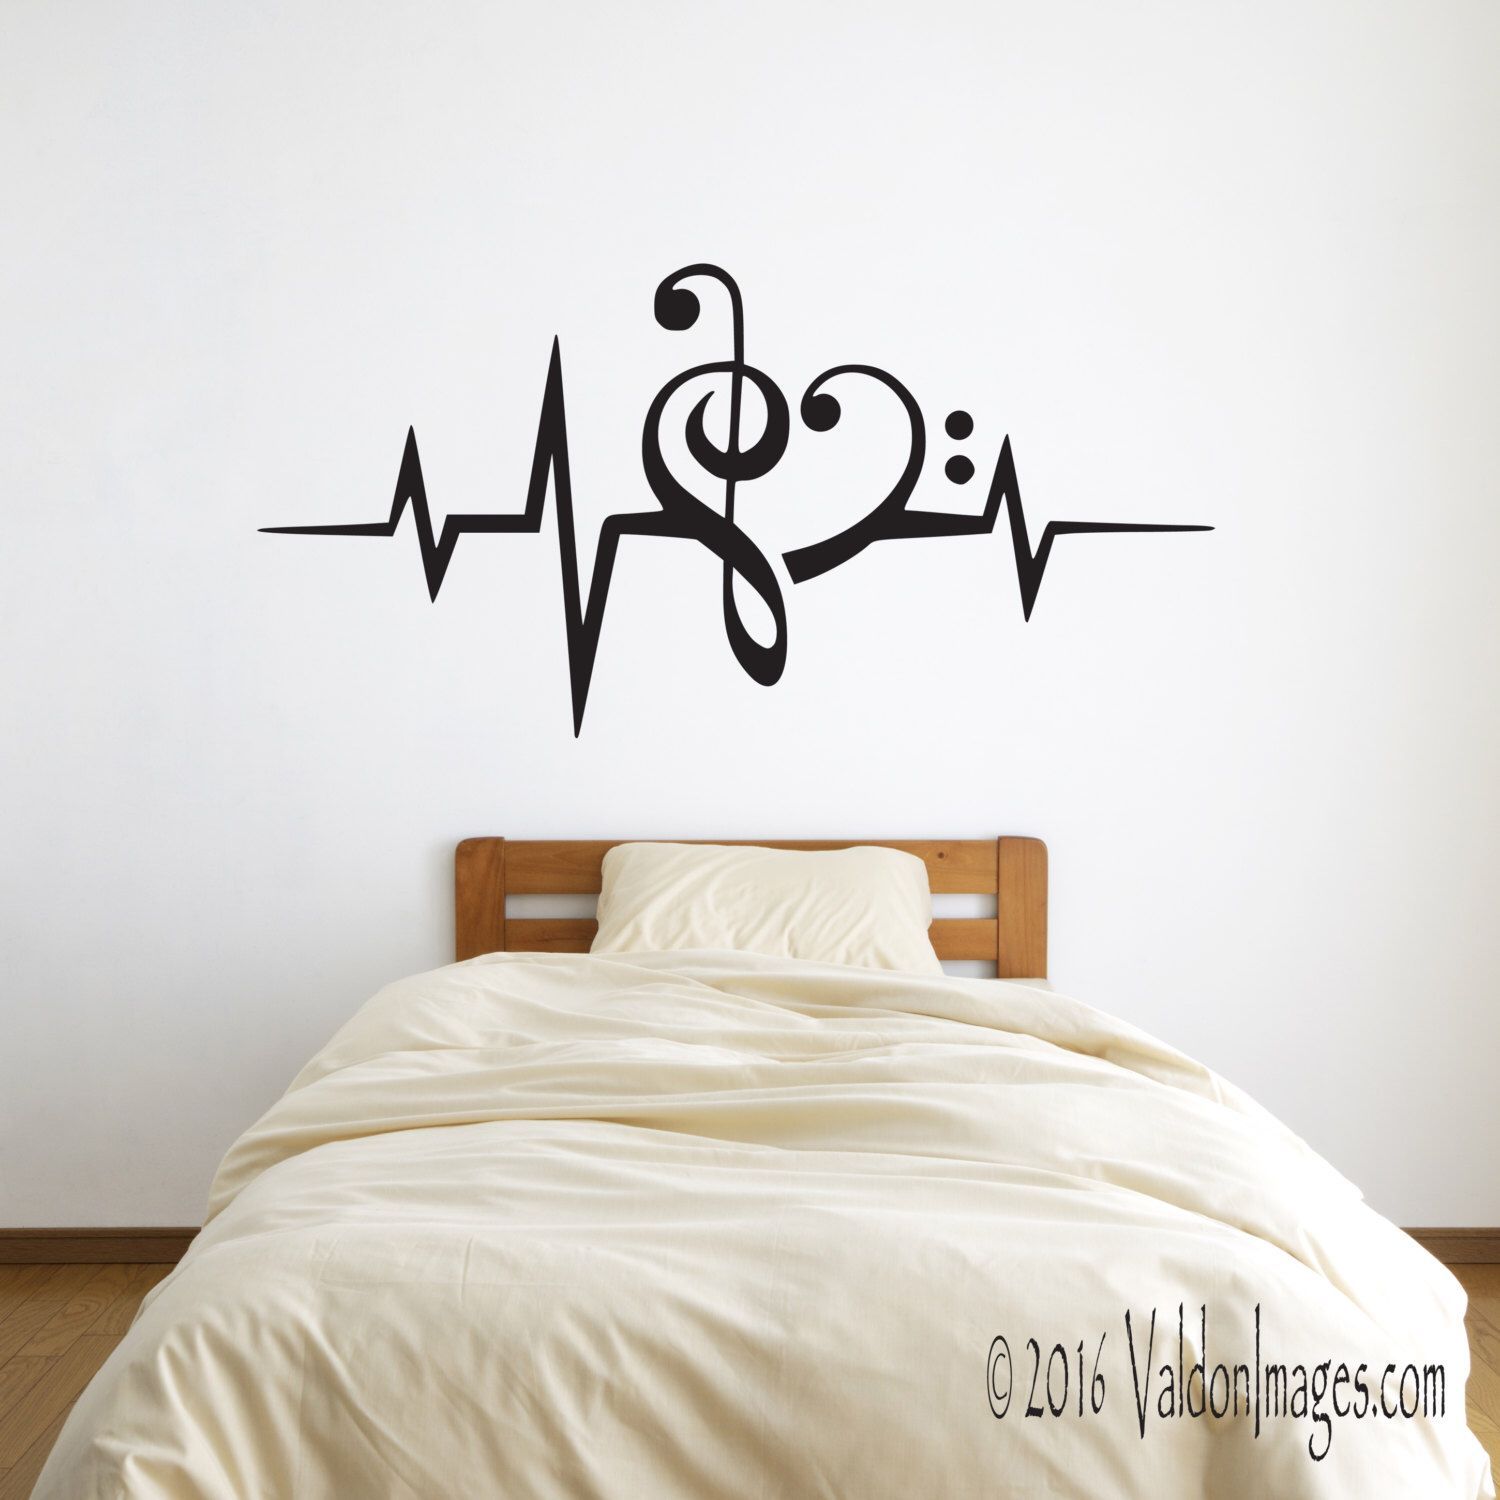 Heartbeat music note wall decal, music wall decal, dorm room decor, bedroom wall decal, living room wall decal, teen room decor,